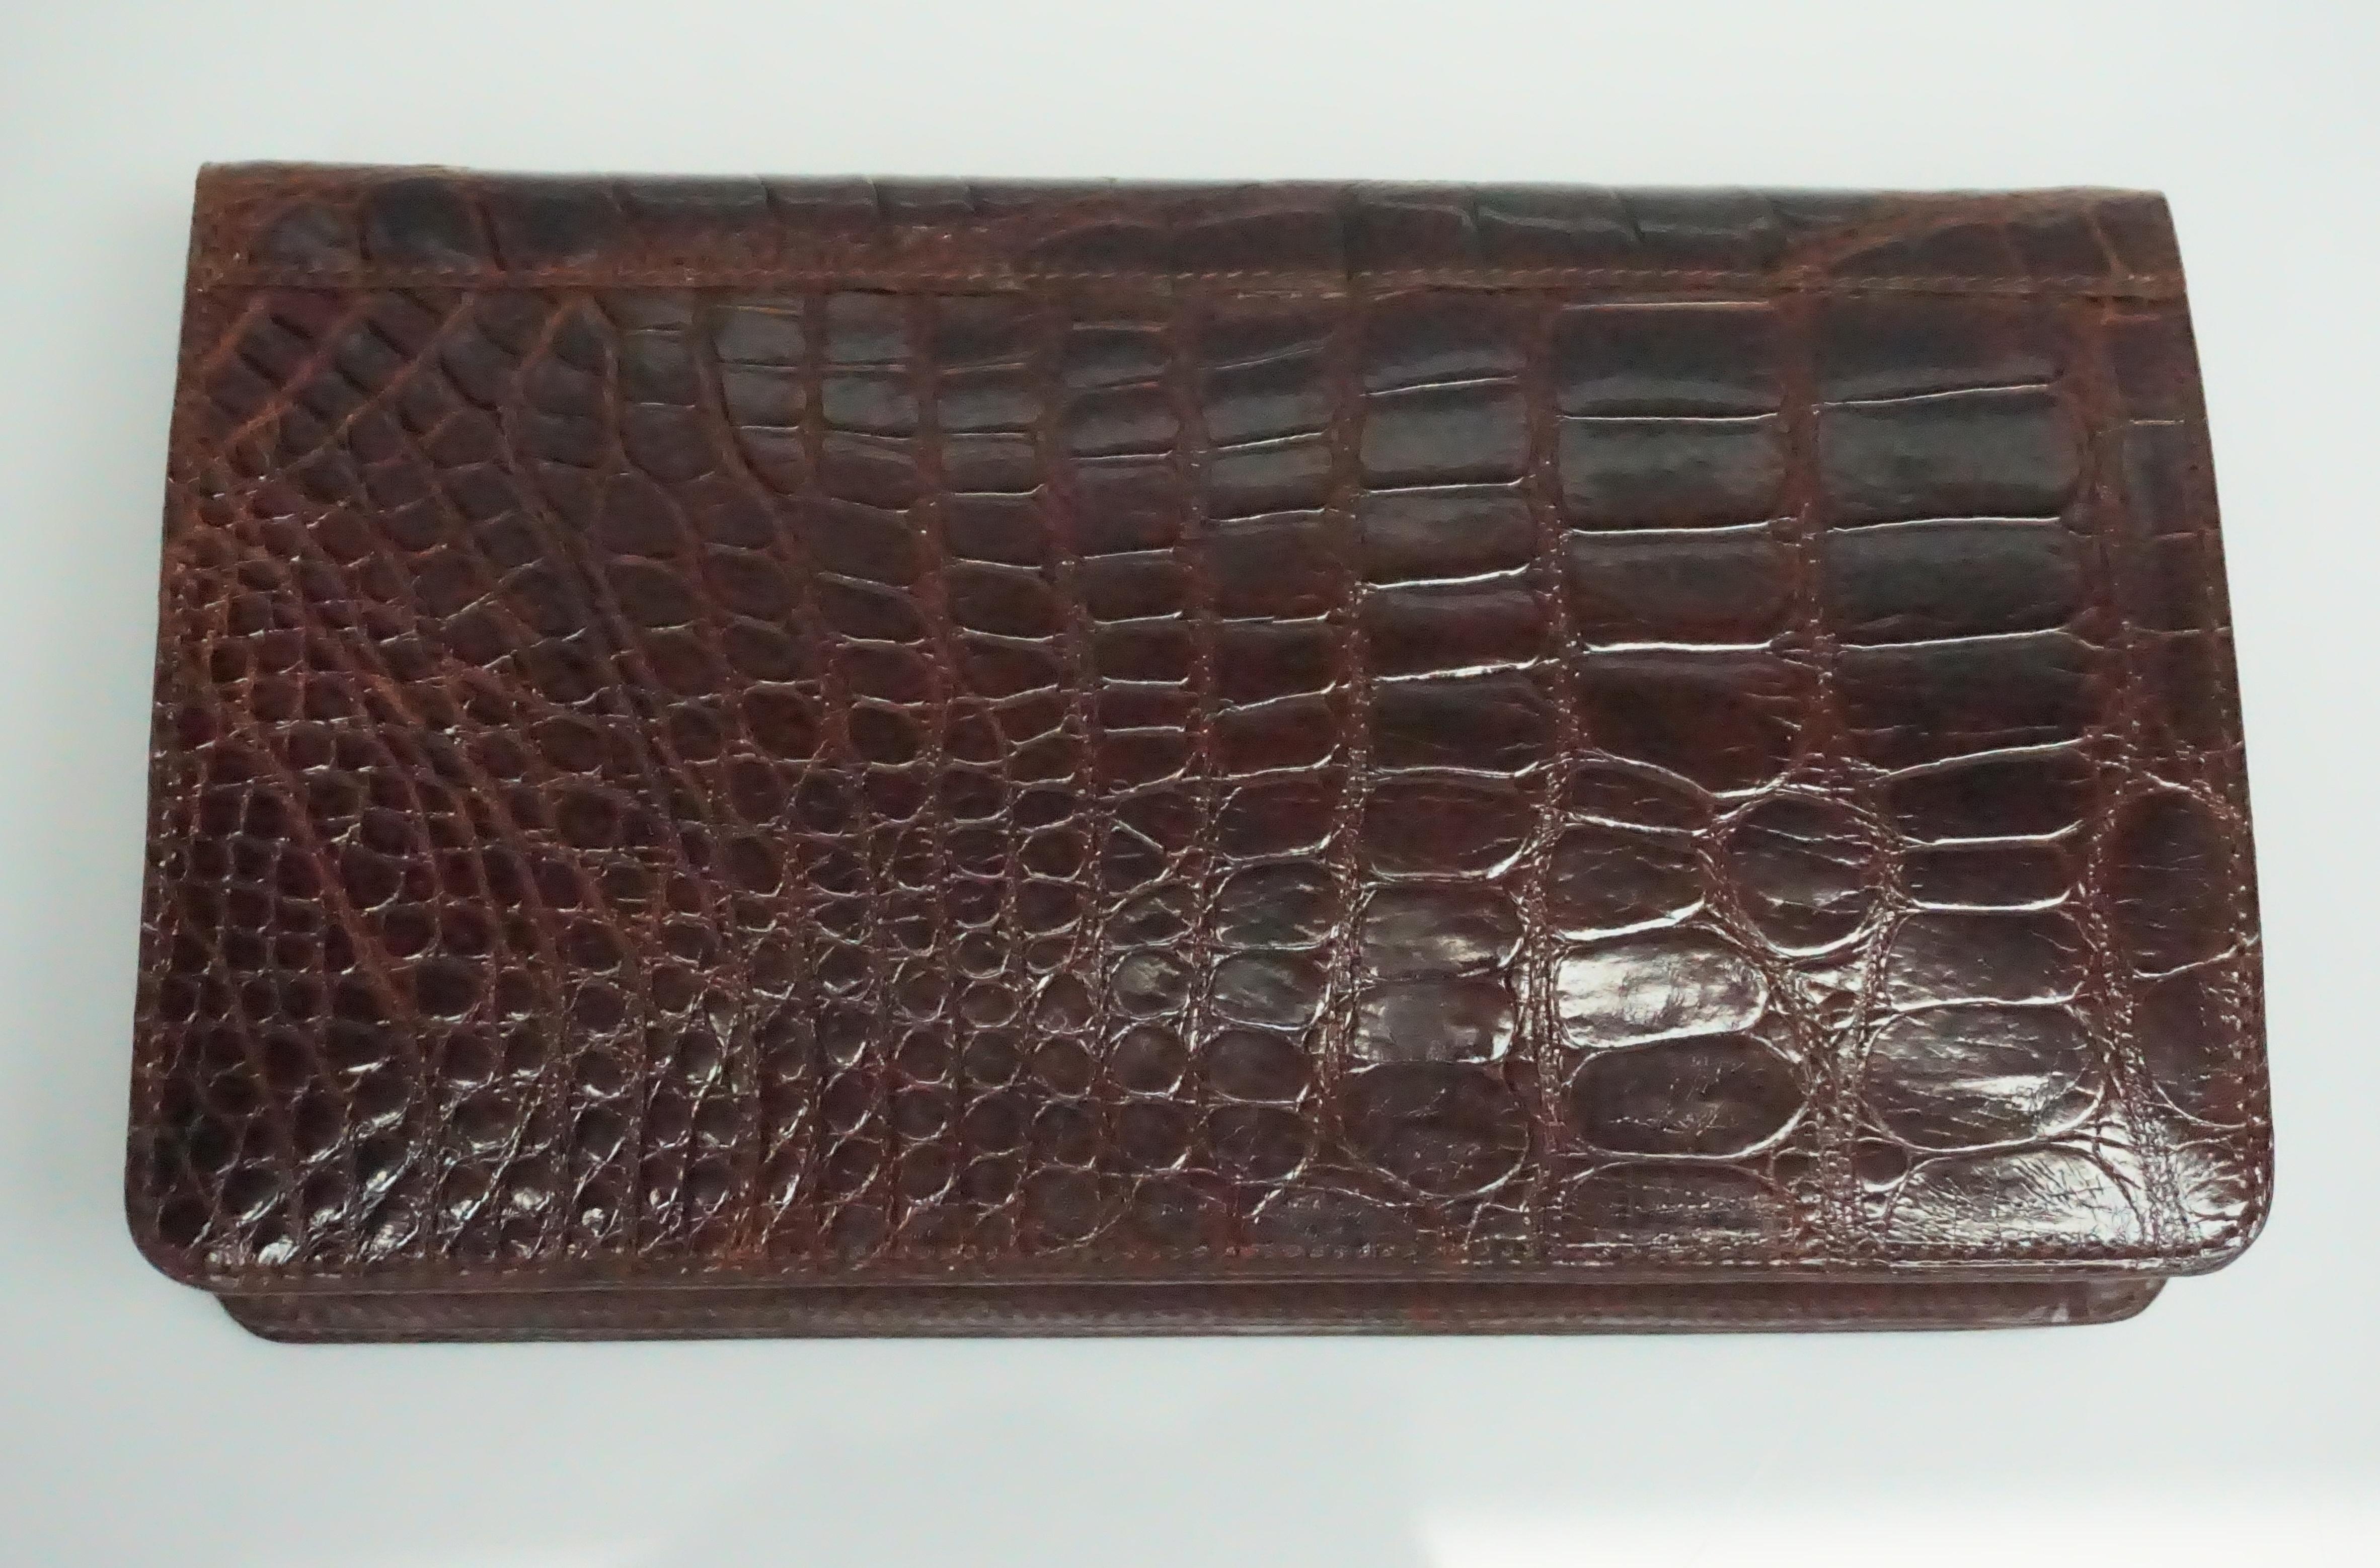 Saks Fifth Avenue Maroon Alligator Clutch  This beautiful alligator clutch is in excellent condition. The flap that opens and closes the clutch is detailed with a magnetic button. The inside of the clutch has one side pocket that closes with a